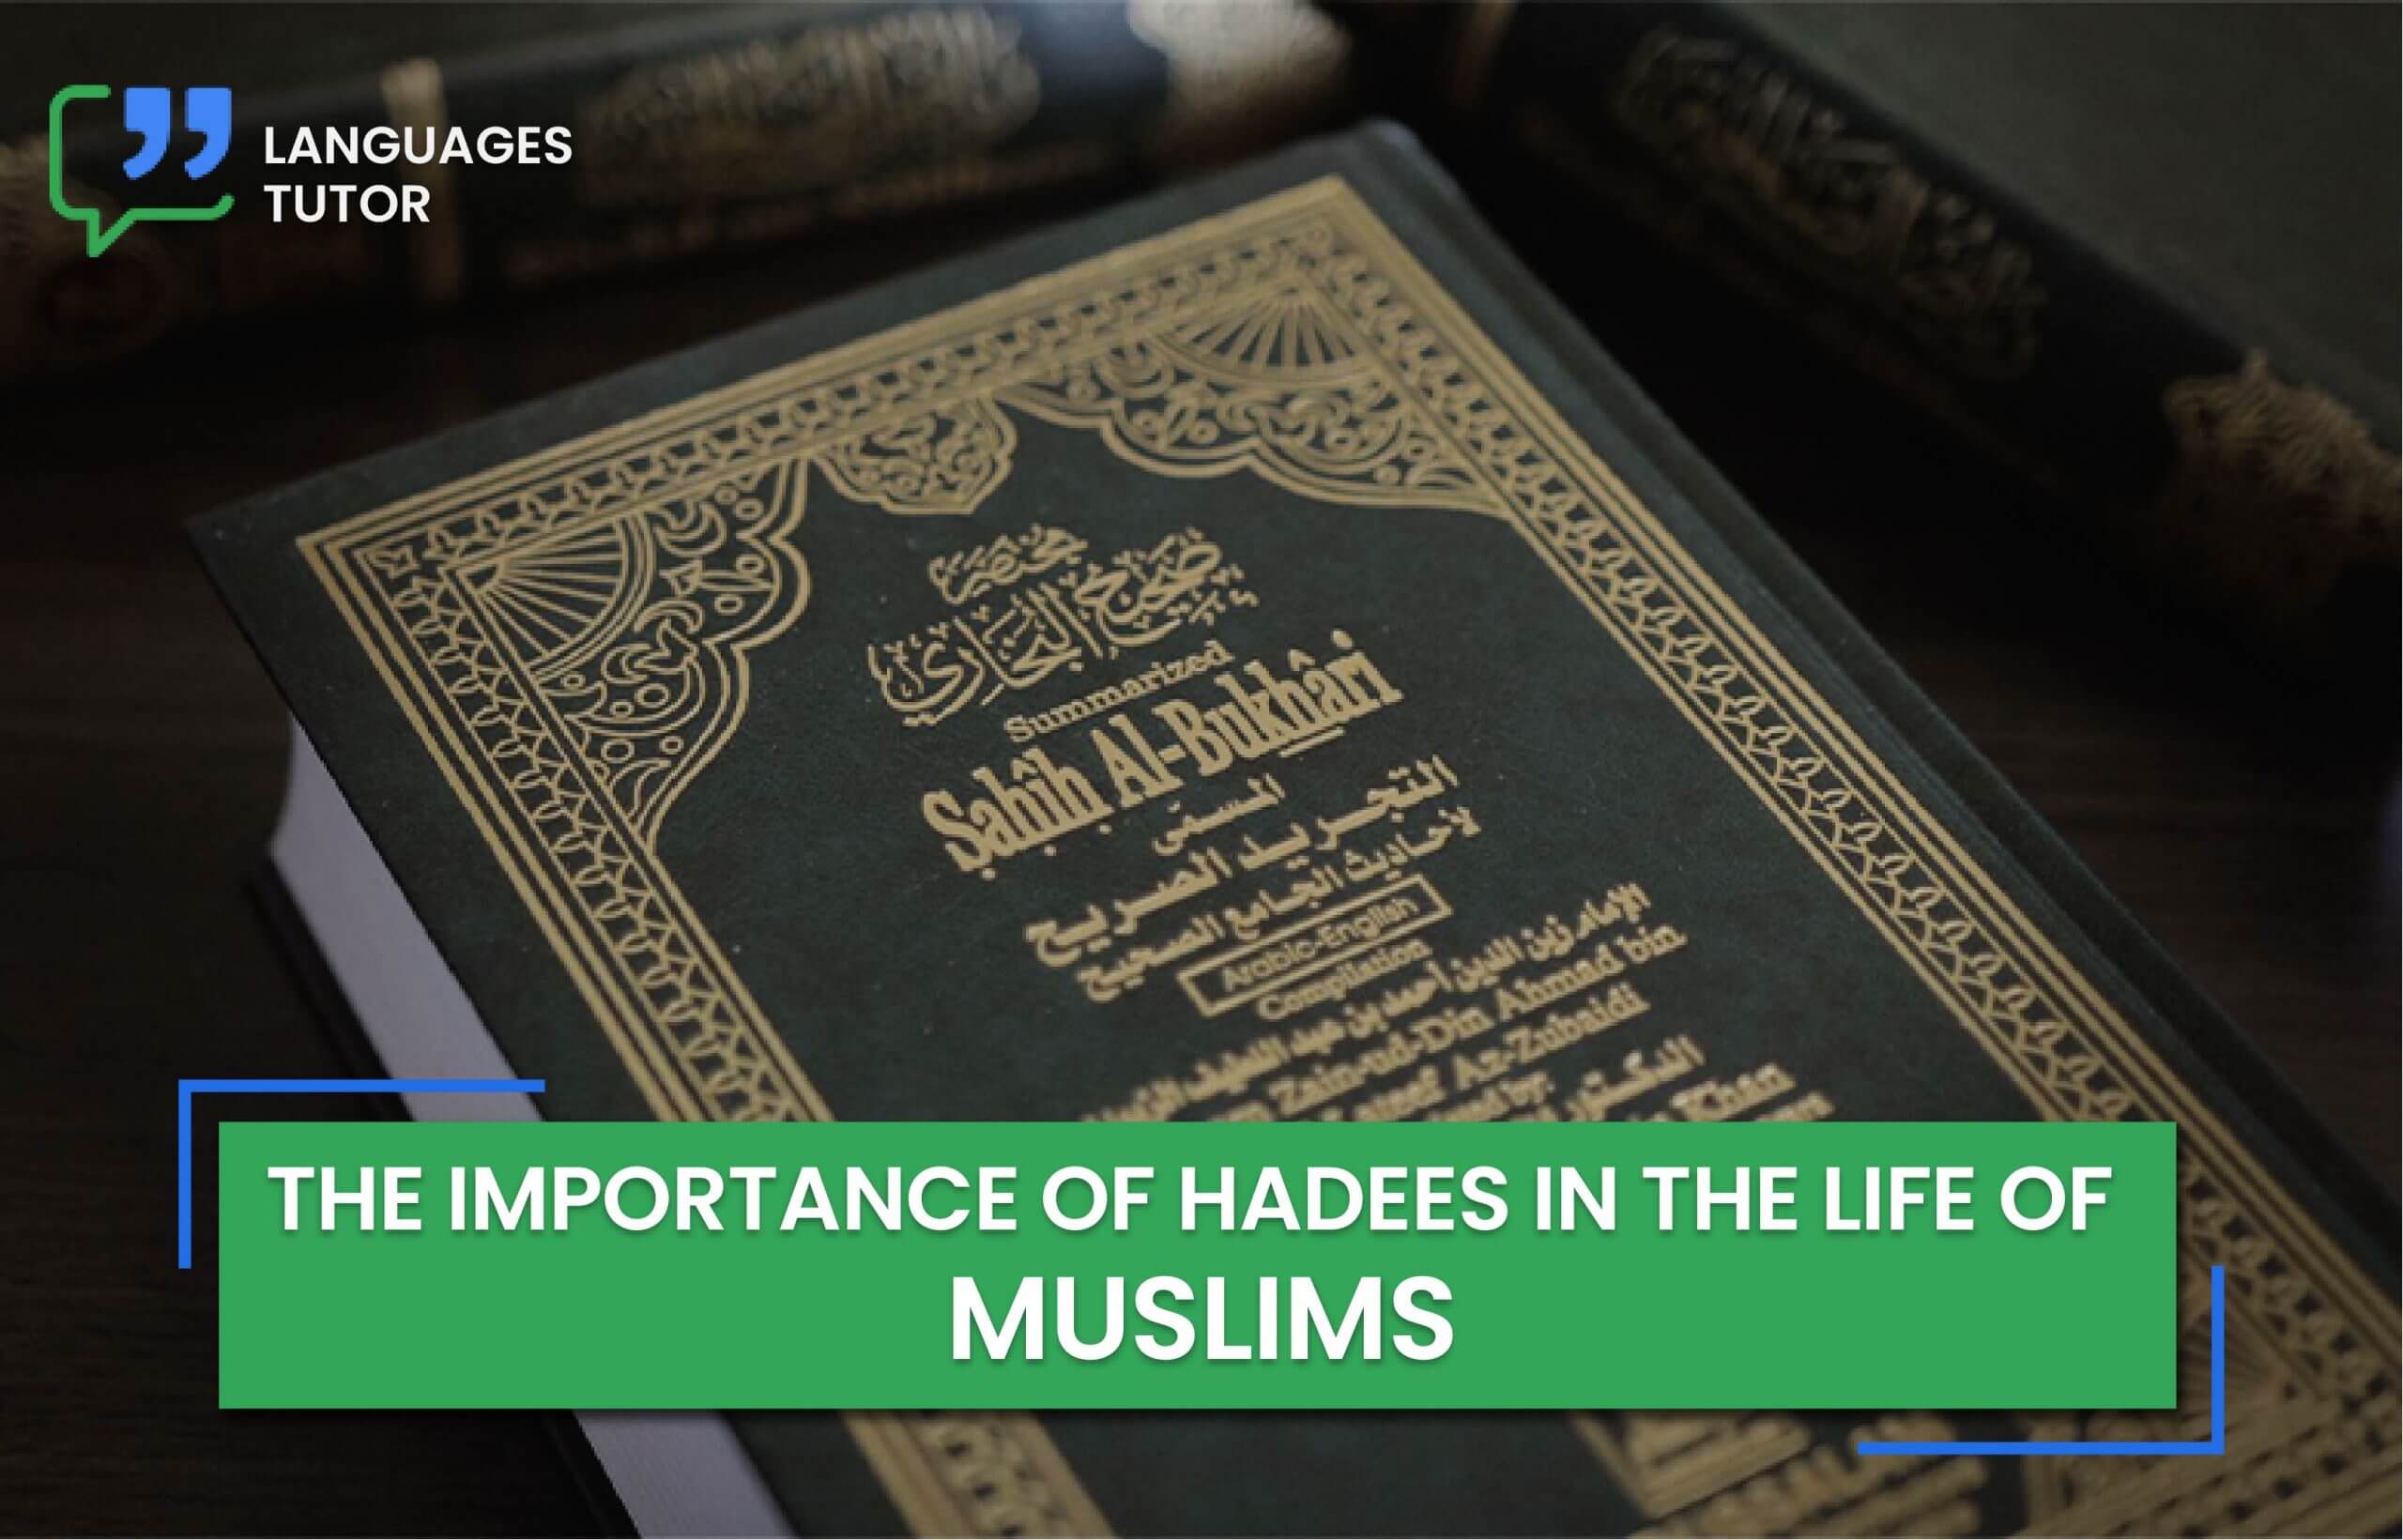 The Importance of Hadith in the Life of Muslims